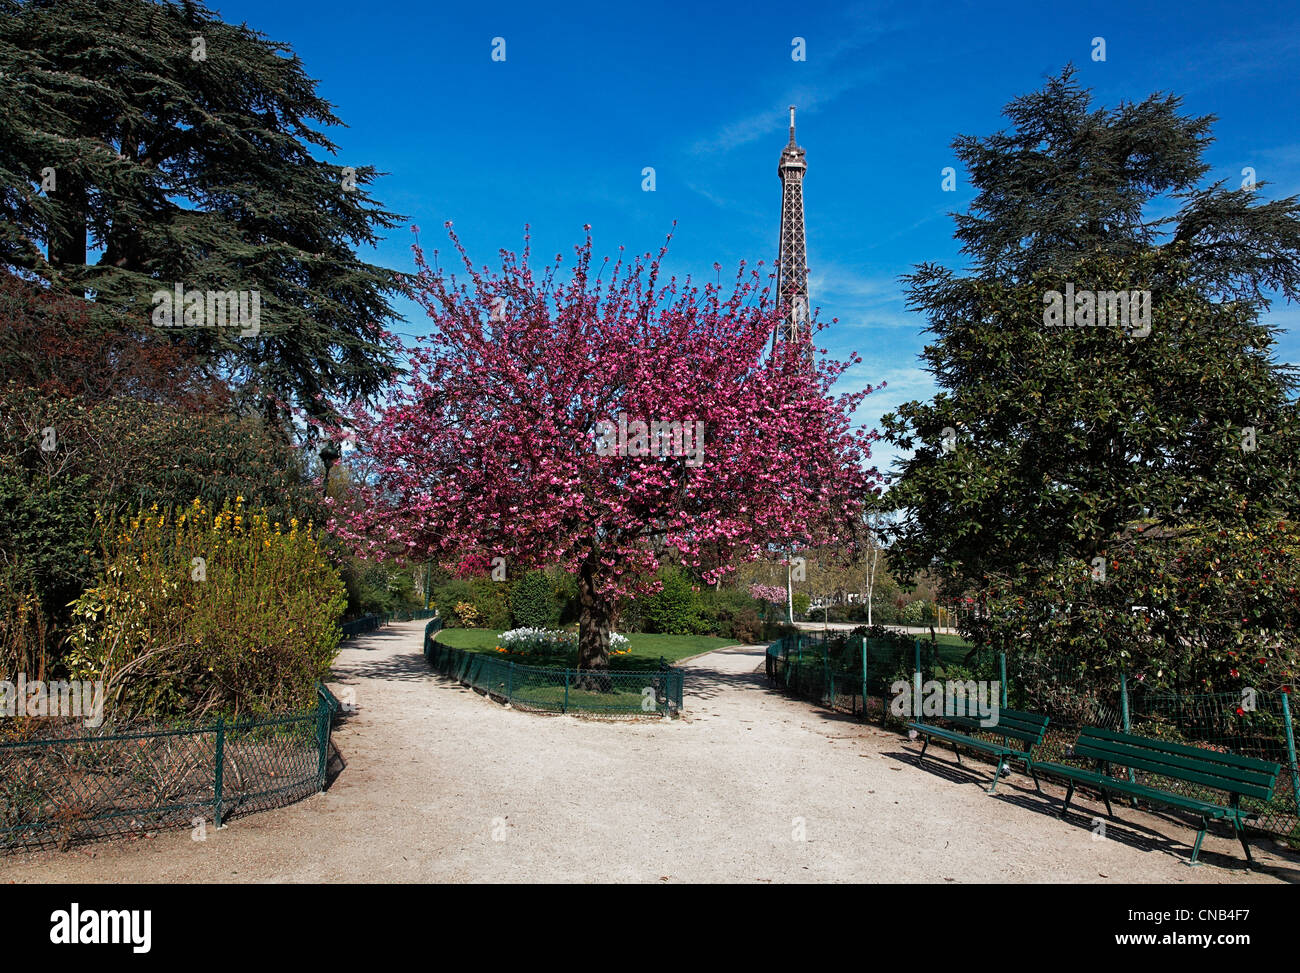 Image during the spring, of the Eiffel Tower from a beautiful park in the vicinity. Stock Photo